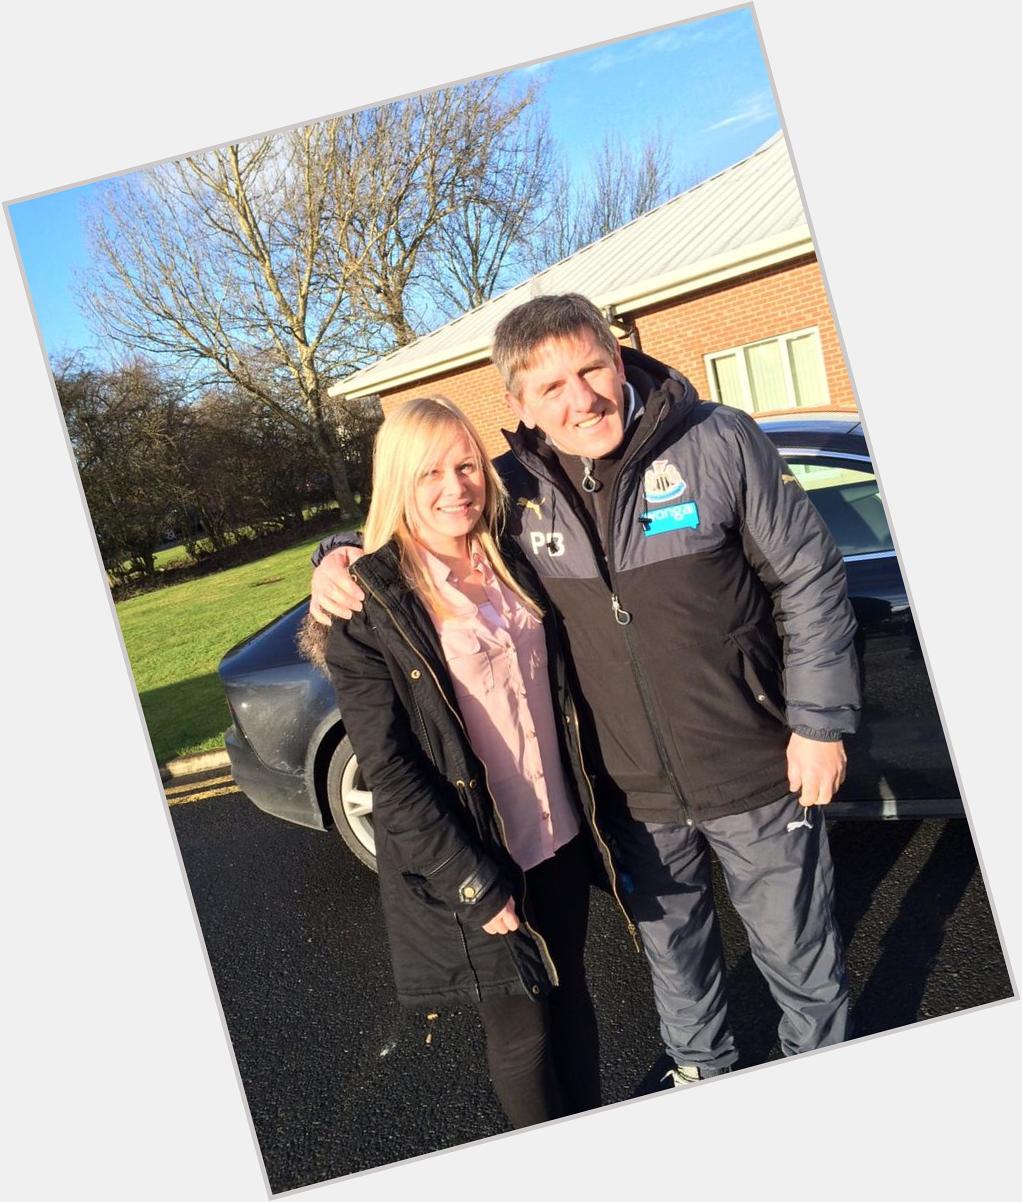 My birthday has been made, finally got to meet Peter Beardsley! Can\t even explain how happy this makes me! 